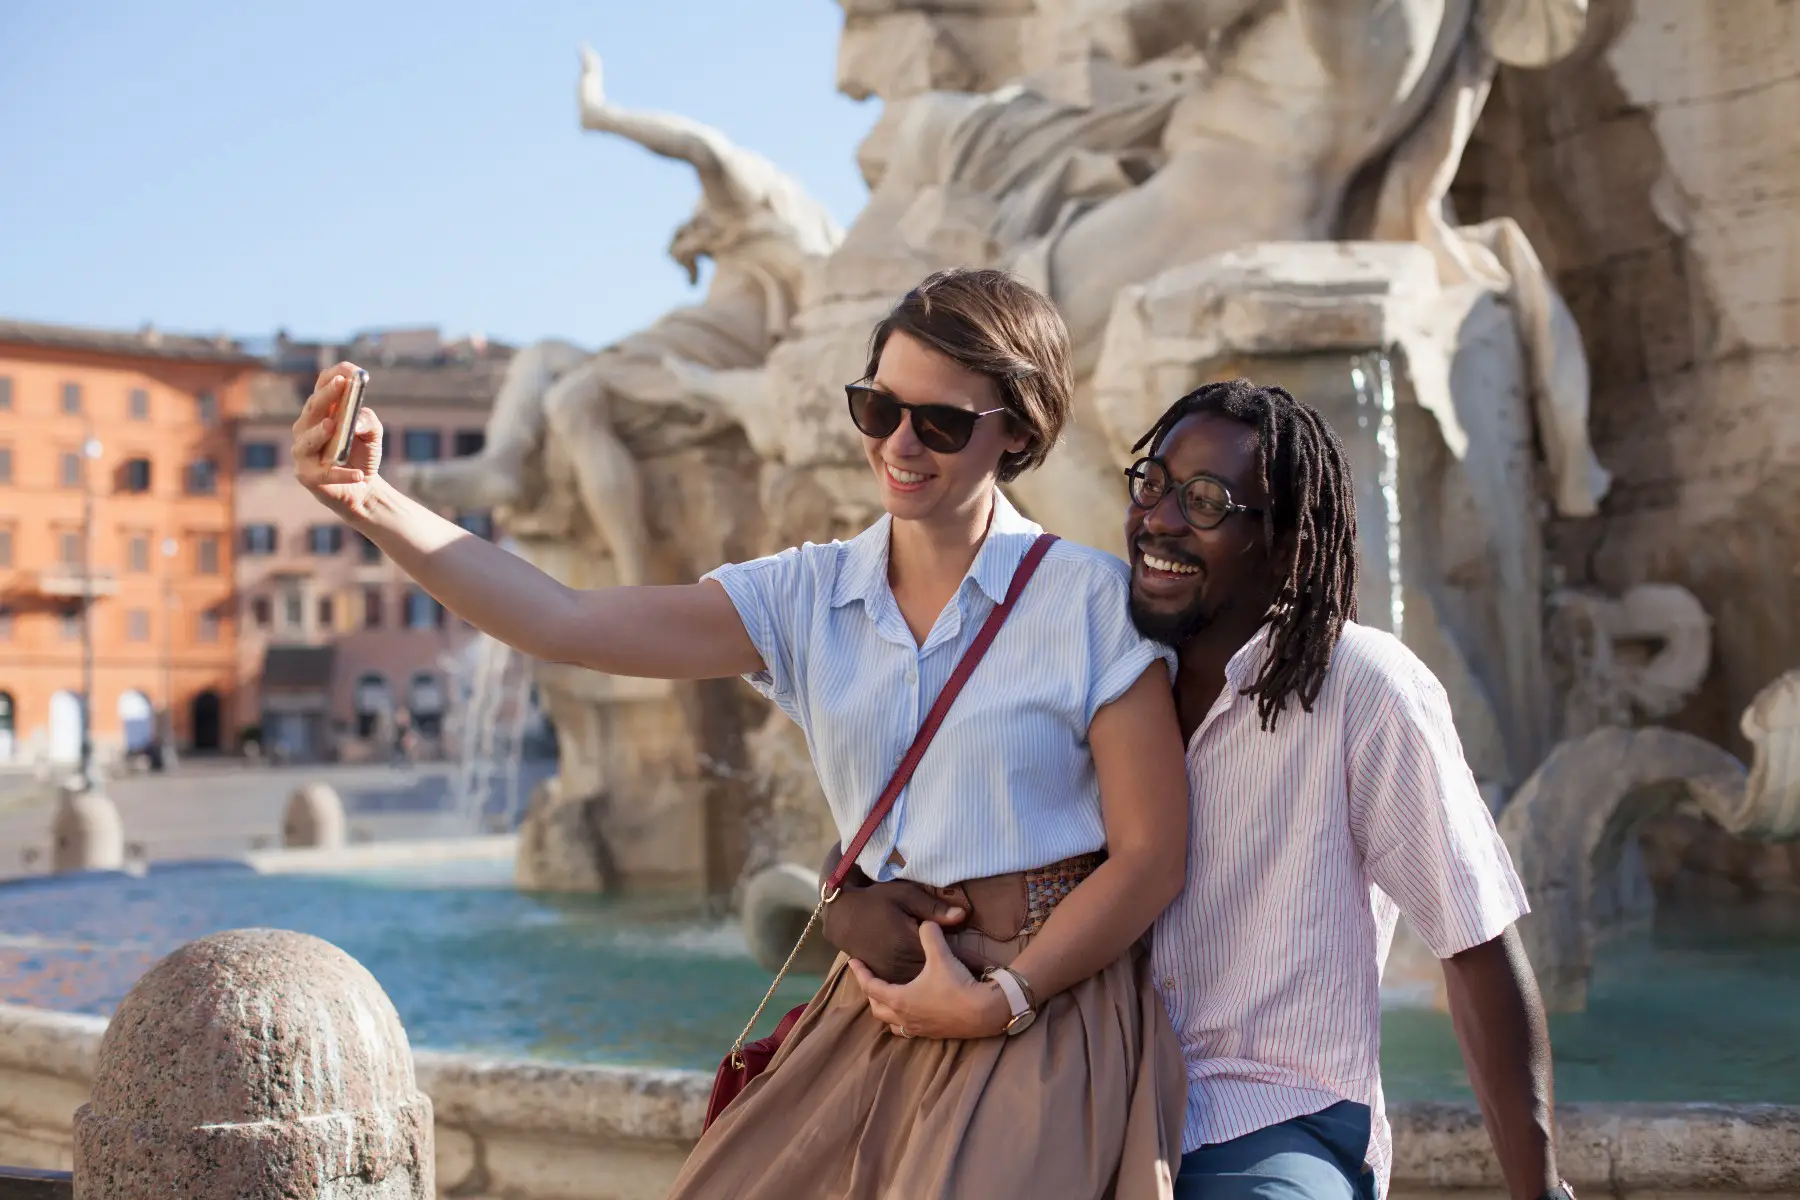 A couple enjoying a date and taking selfies at Piazza Navona in Rome